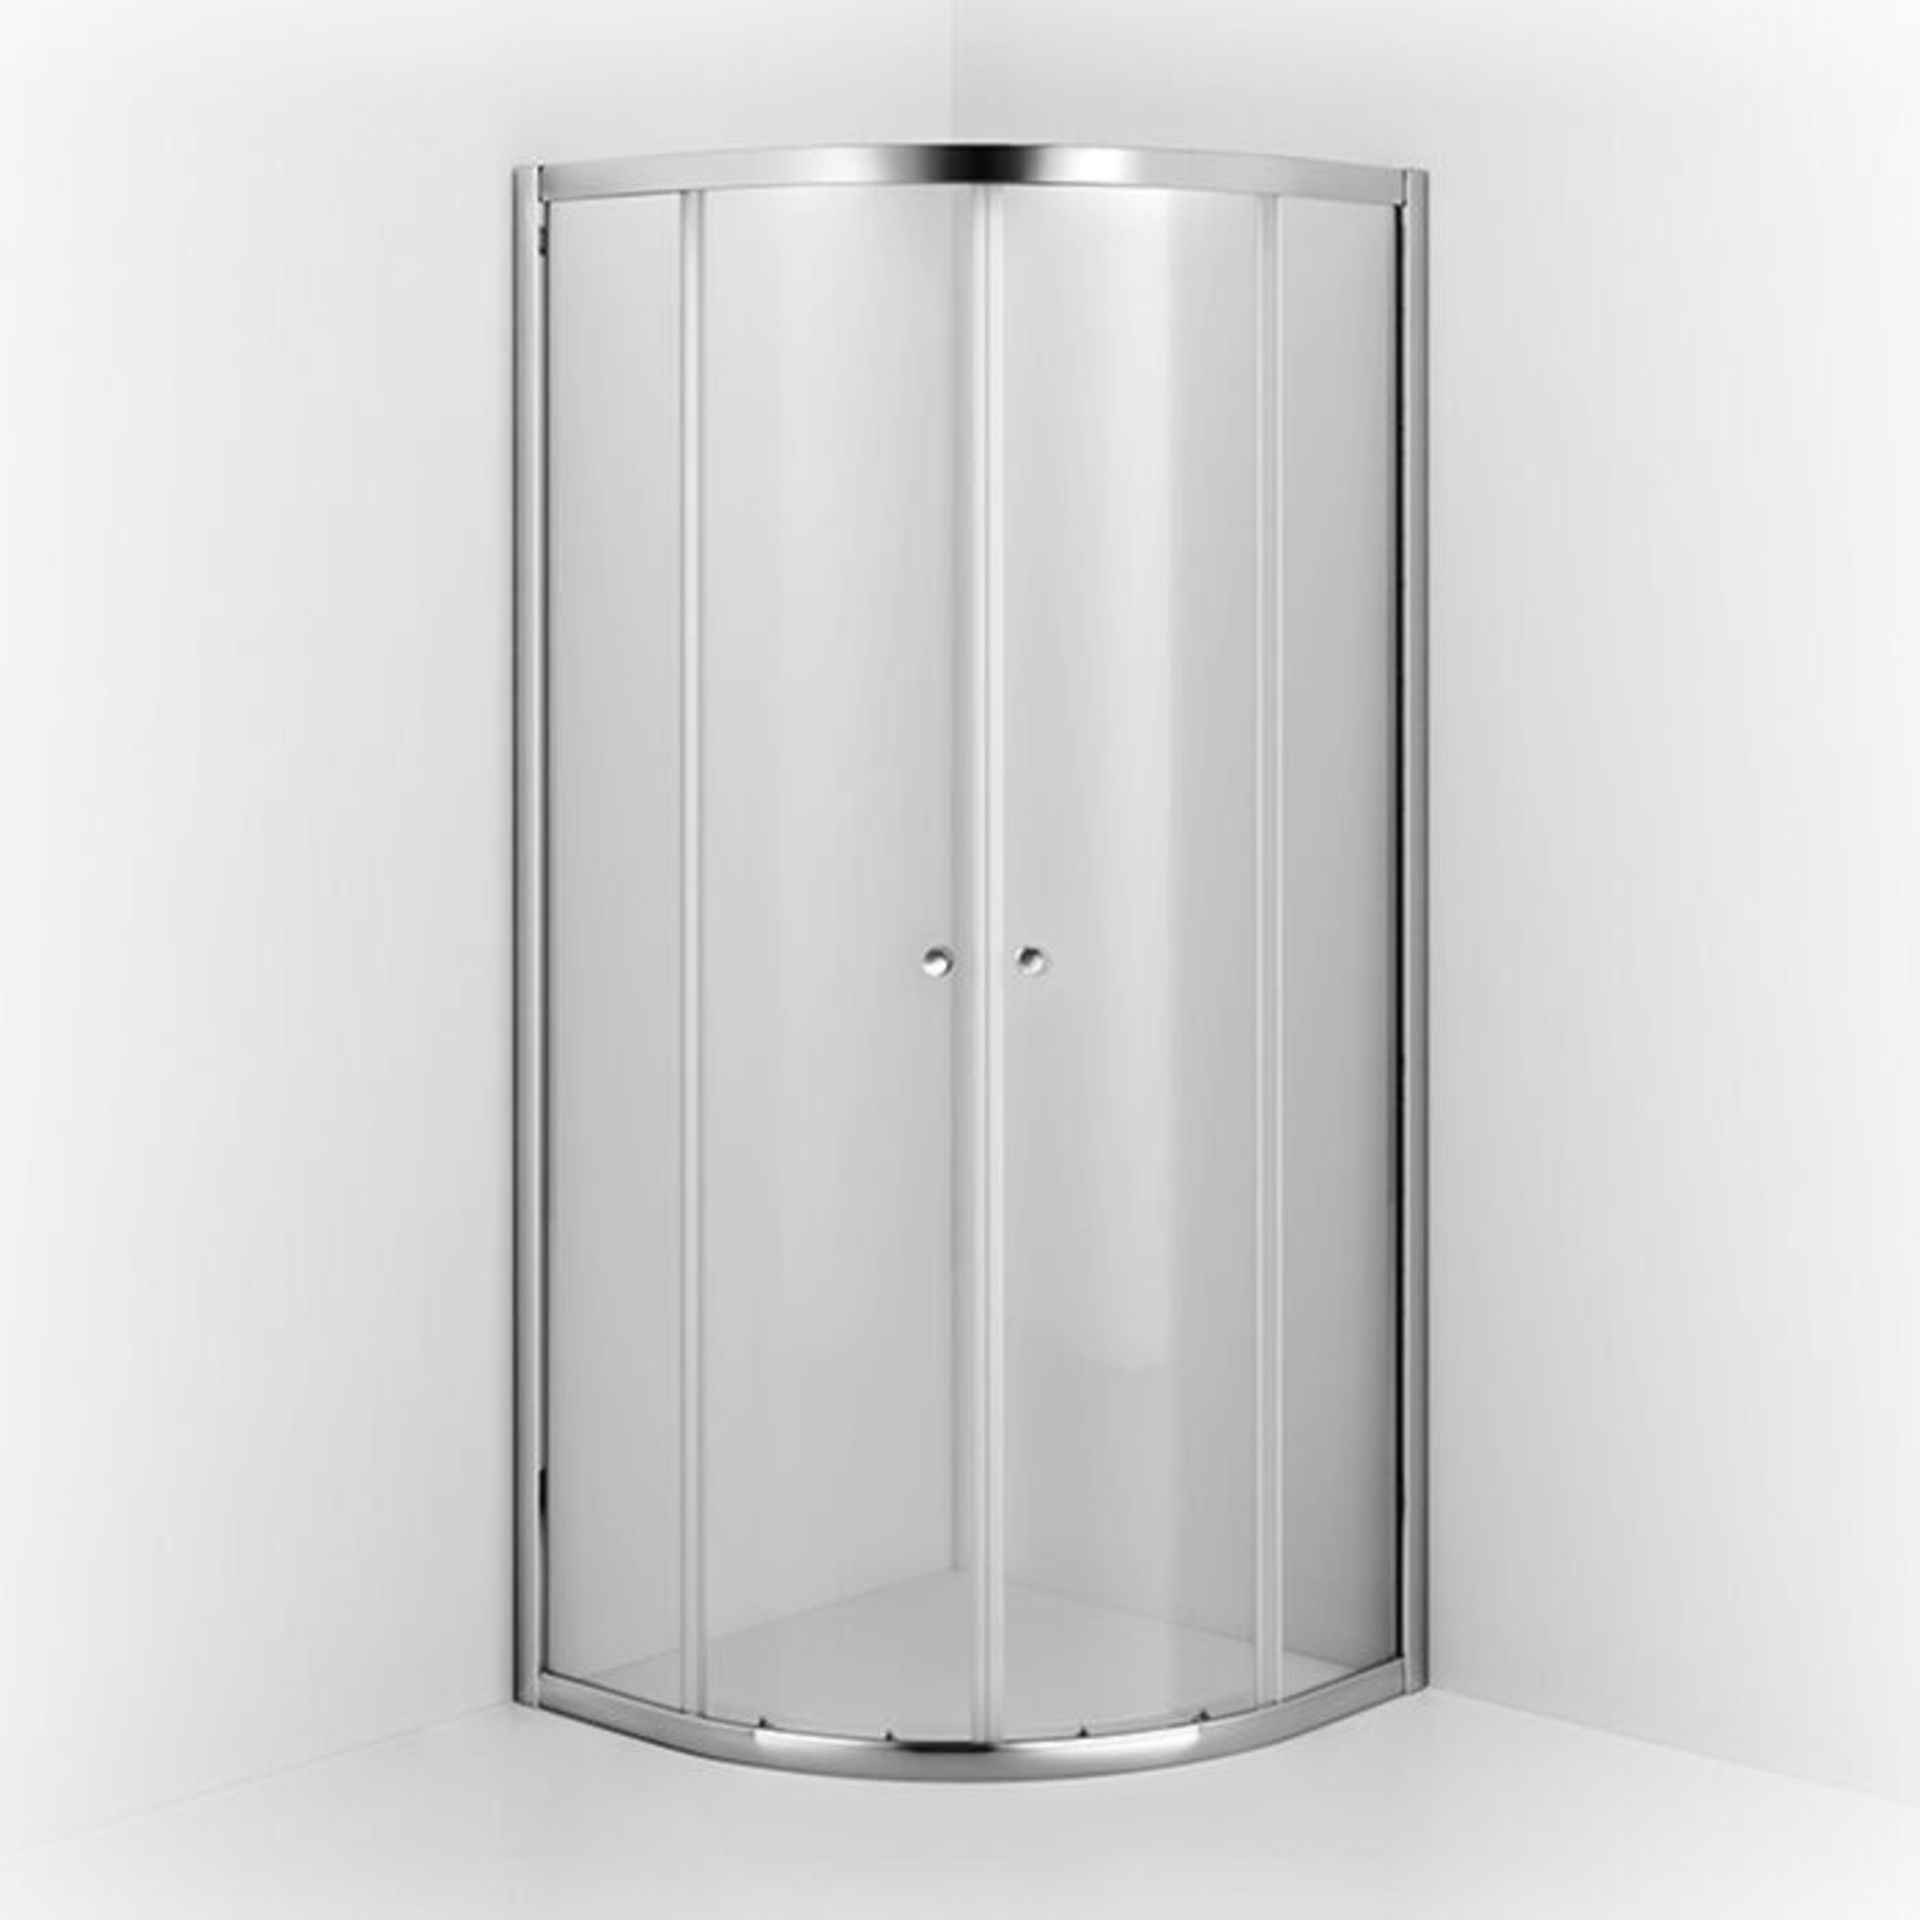 (J40) 900x900mm Quadrant Shower Enclosure. RRP £396.99. constructed of 4mm lightweight safety ...